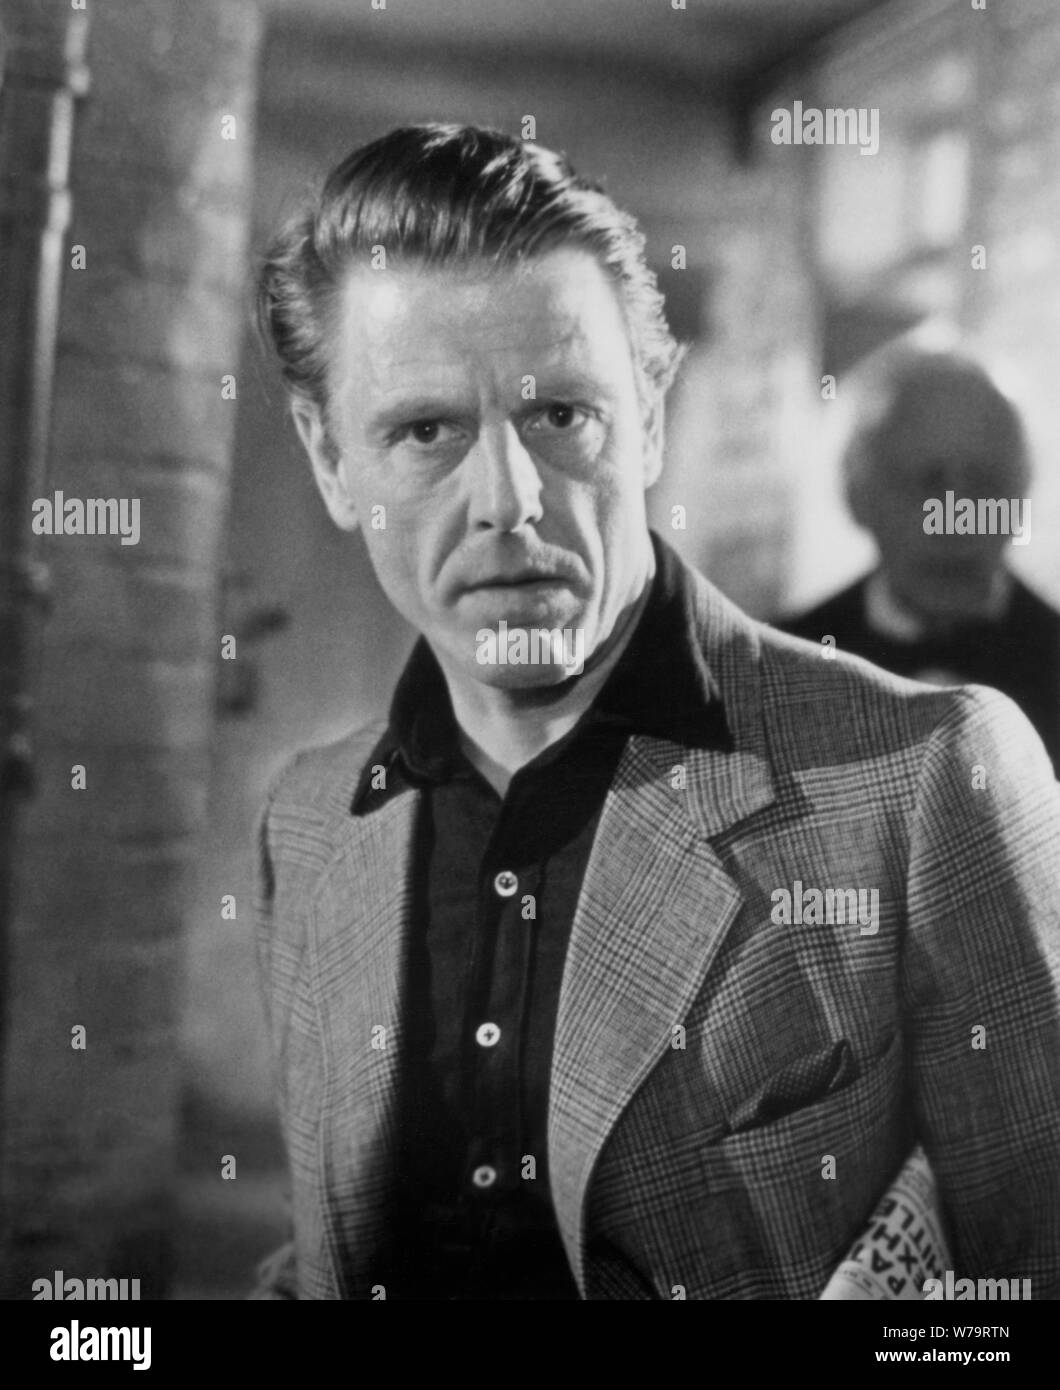 Edward Fox, Publicity Portrait for the Film, 'The Dresser', Columbia Pictures, 1983 Stock Photo